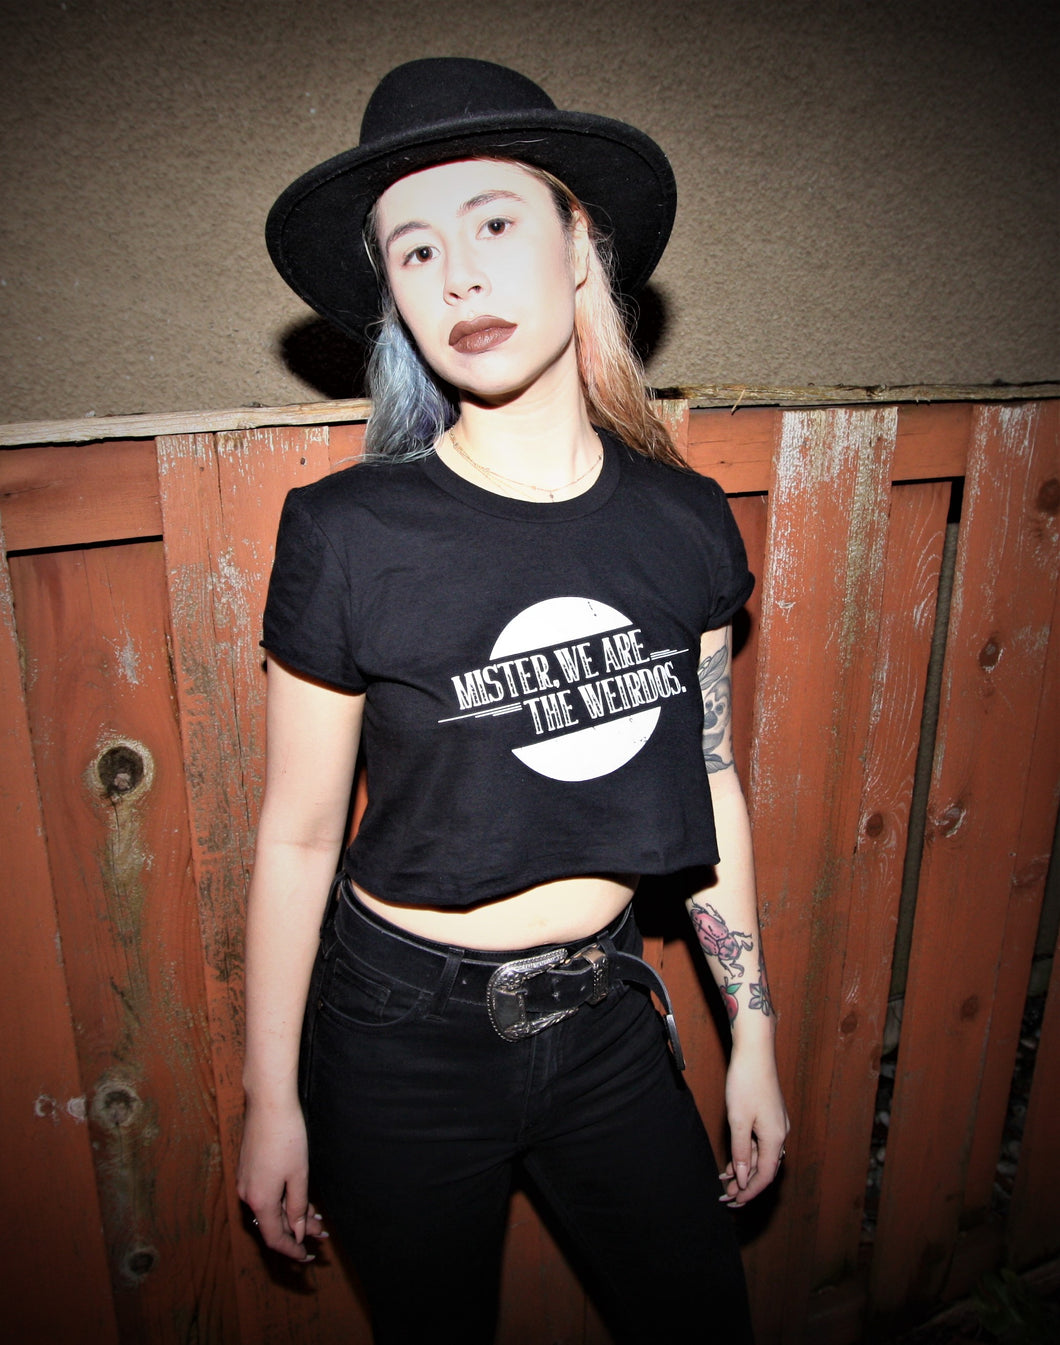 Mister, We Are the Weirdos - Branded Crop Top